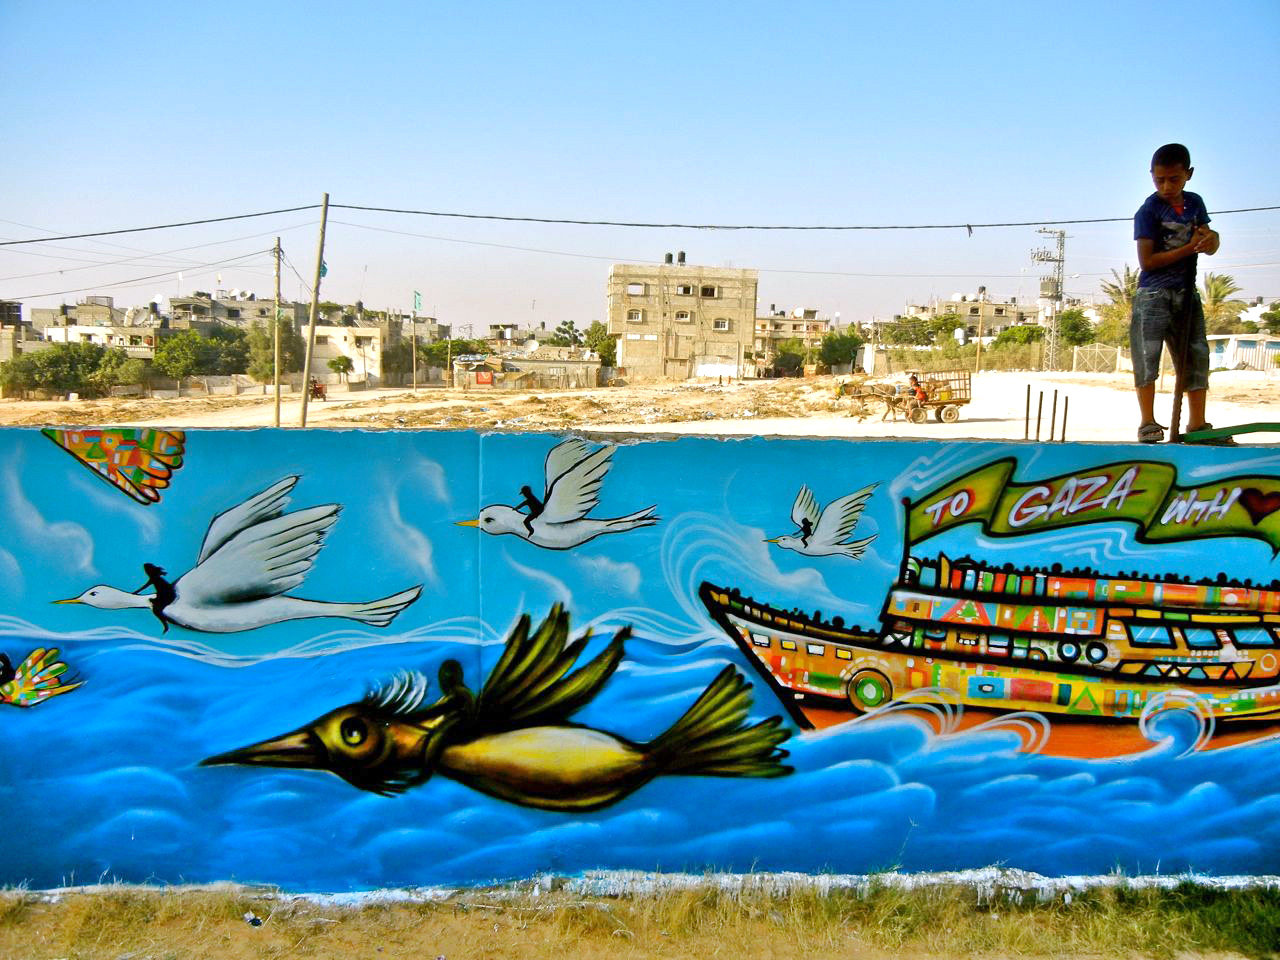 Mural from West Bank, Palestine